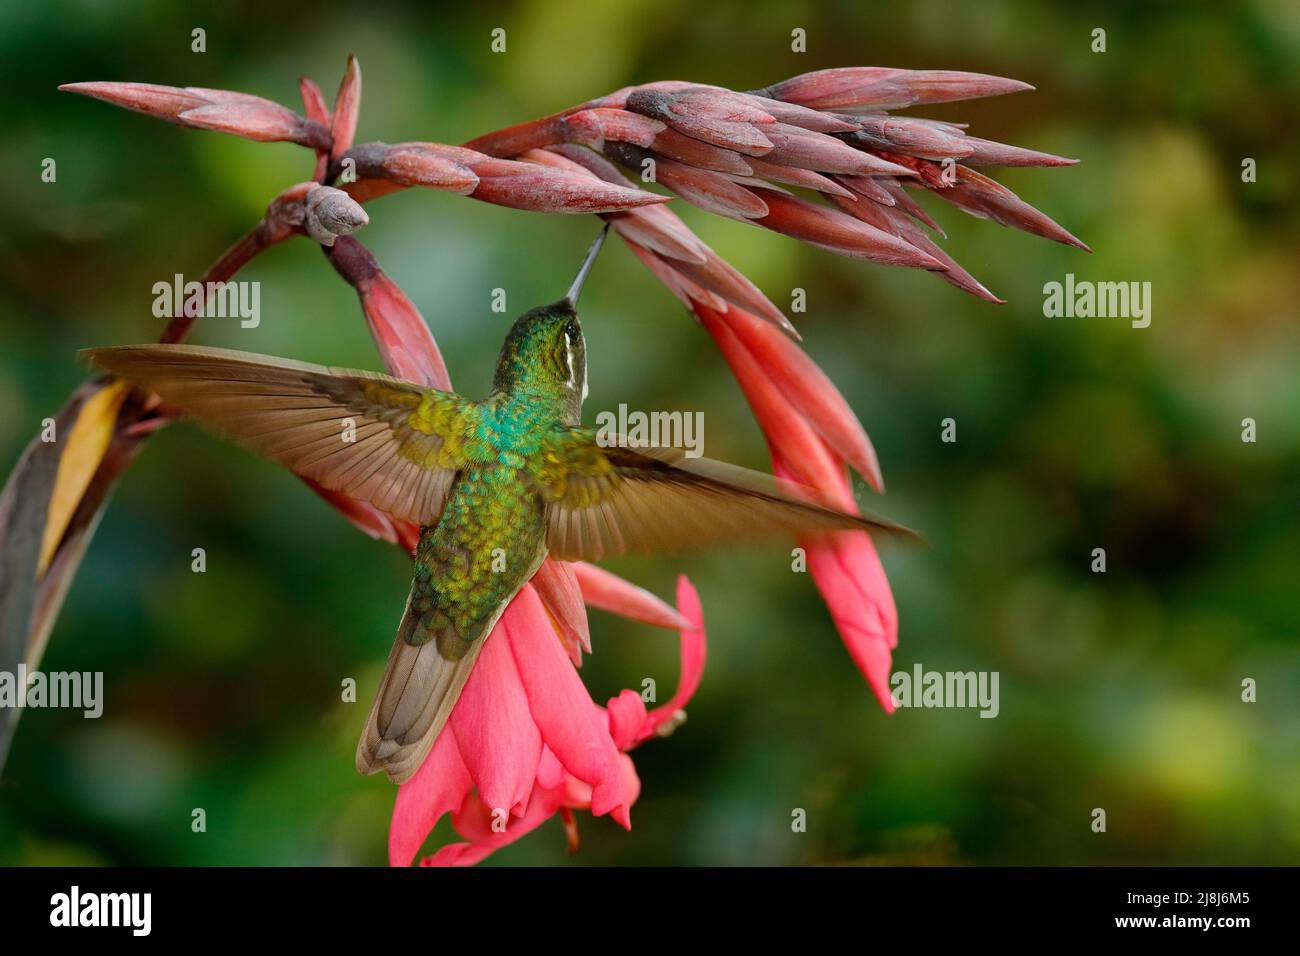 Magnificent Hummingbird, Eugenes fulgens, nice hummingbird, flying next to beautiful red flower with ping flowers in the background, Savegre, Costa Ri Stock Photo